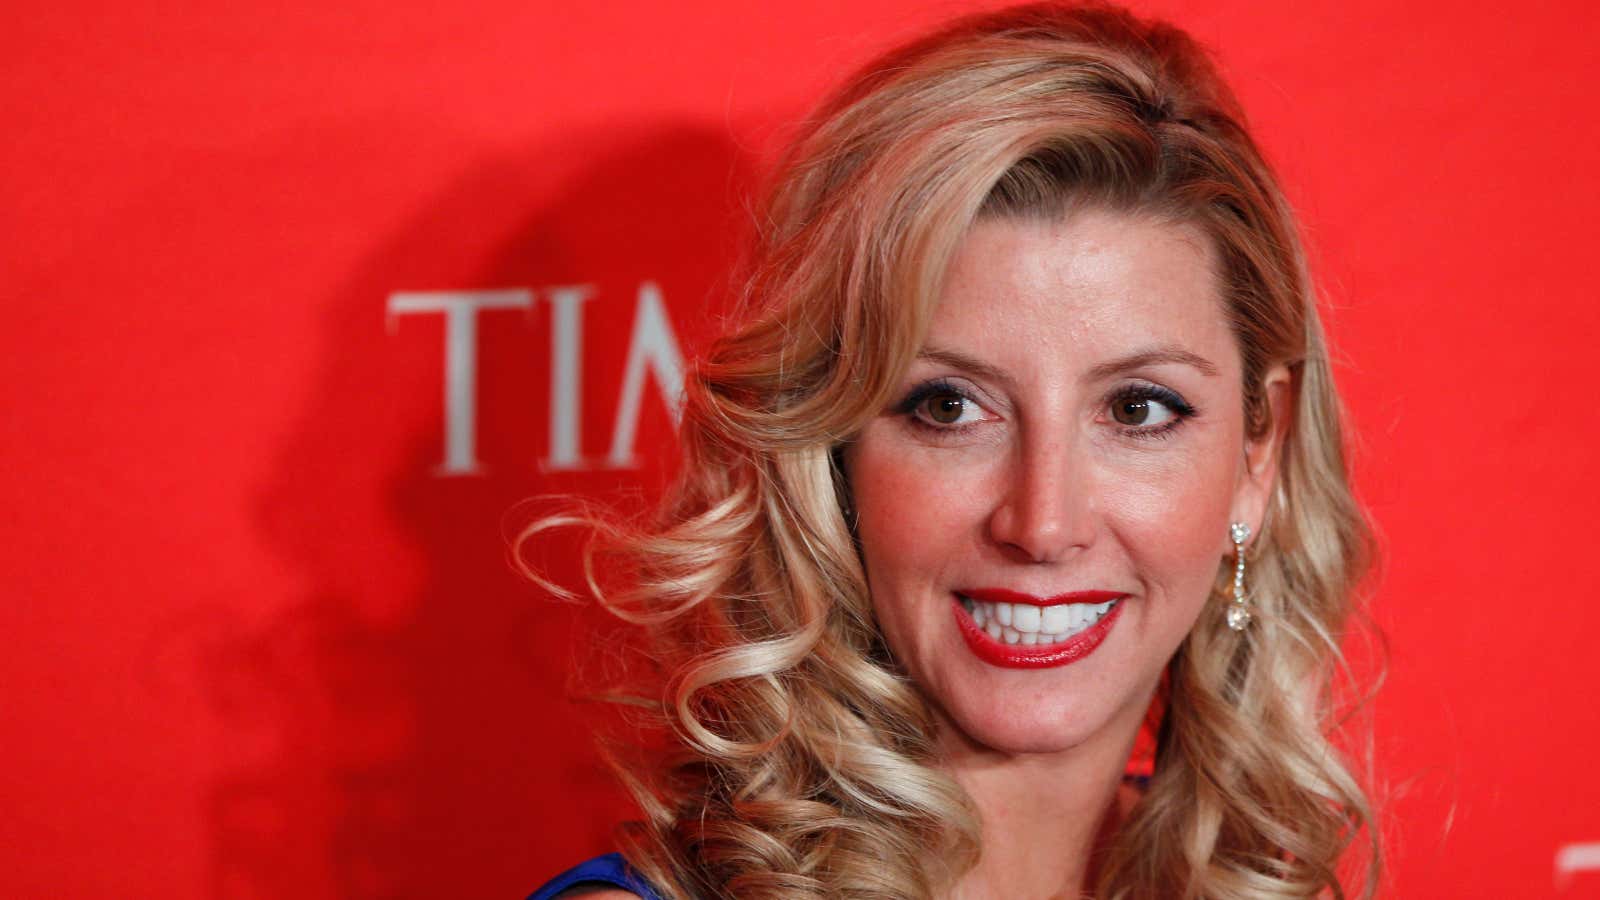 Spanx founder is the youngest female billionaire